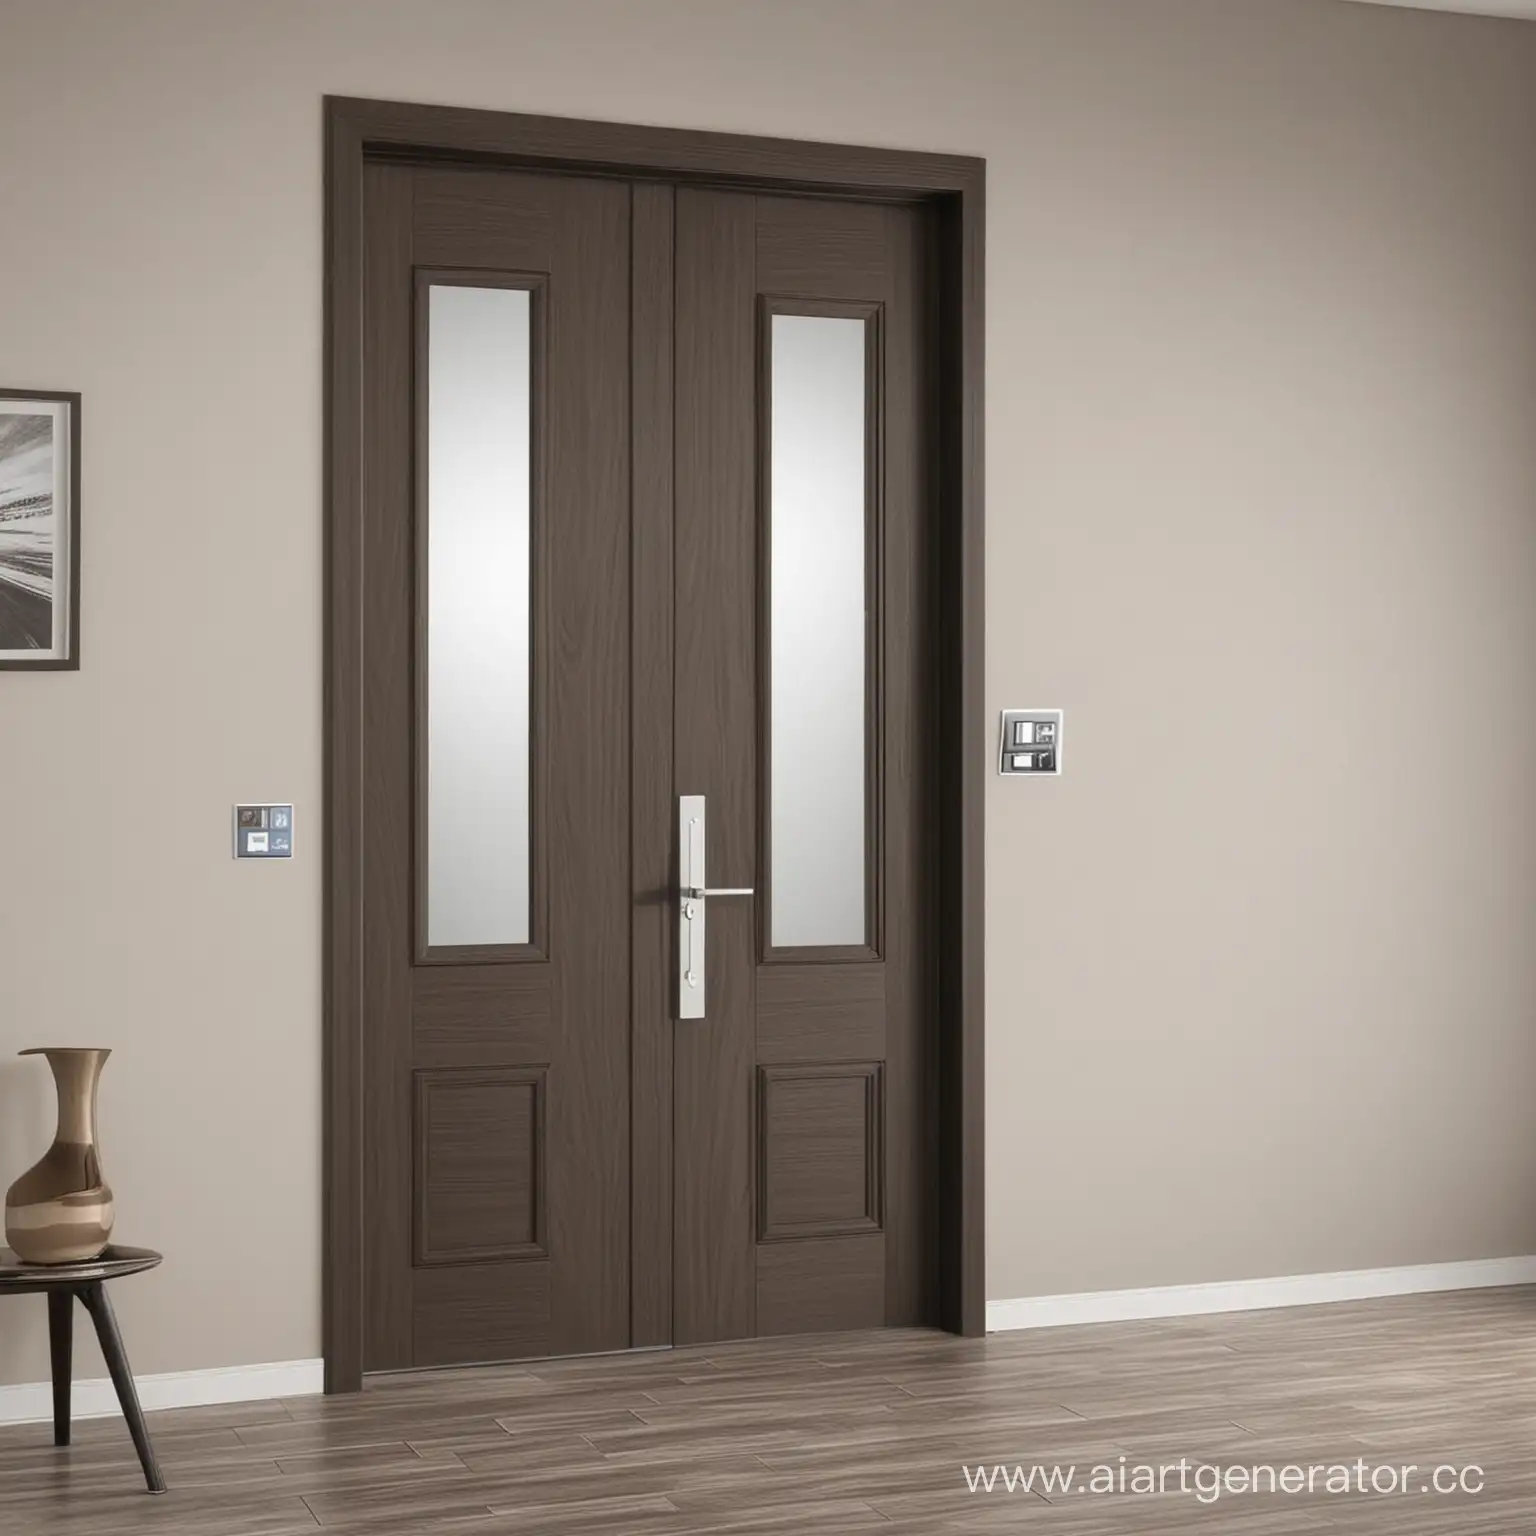 Stylish-and-Cozy-Interior-with-Master-Doors-Modern-Door-Frames-for-a-Safe-Home